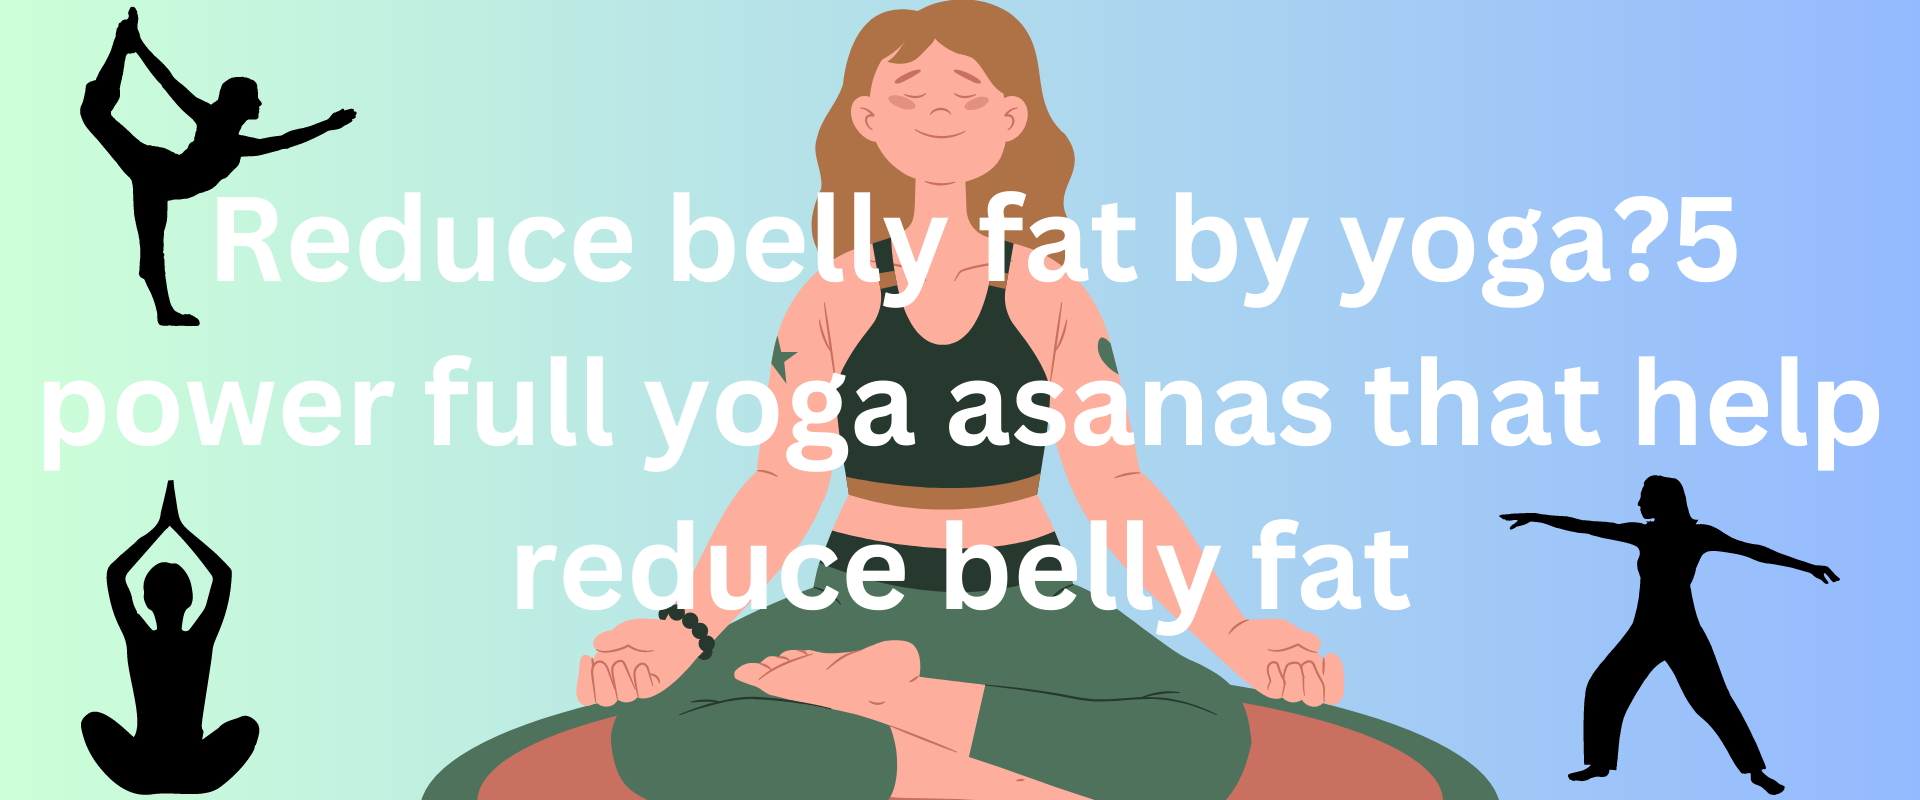 Read more about the article Reduce belly fat by yoga?5 power full yoga asanas that help reduce belly fat